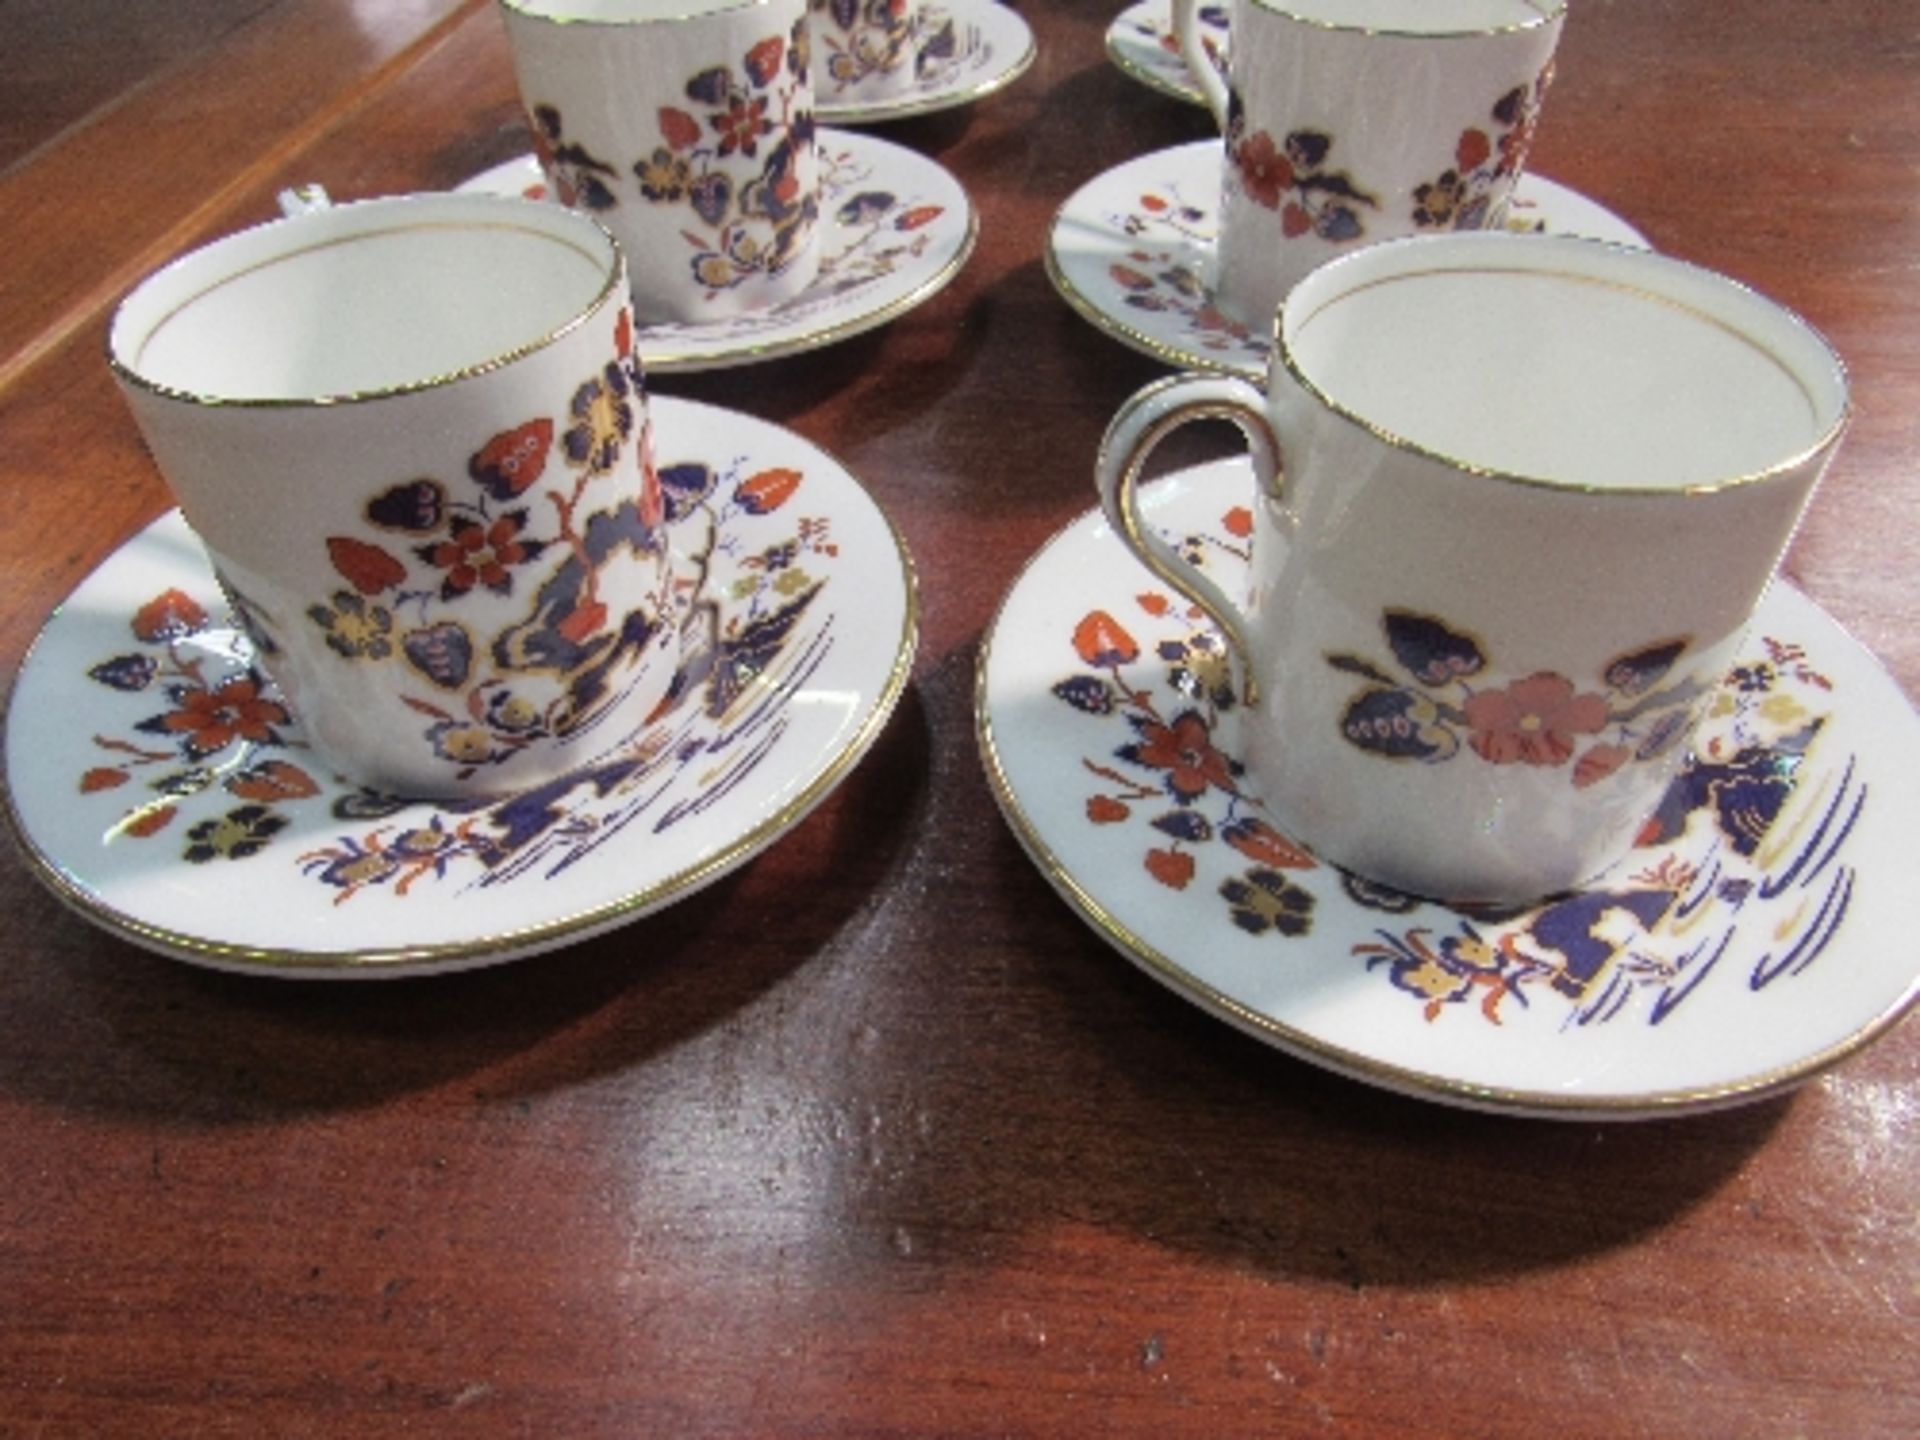 Aynsley 'Birds of Paradise' reproduction part coffee service (16 pieces) - Image 3 of 4